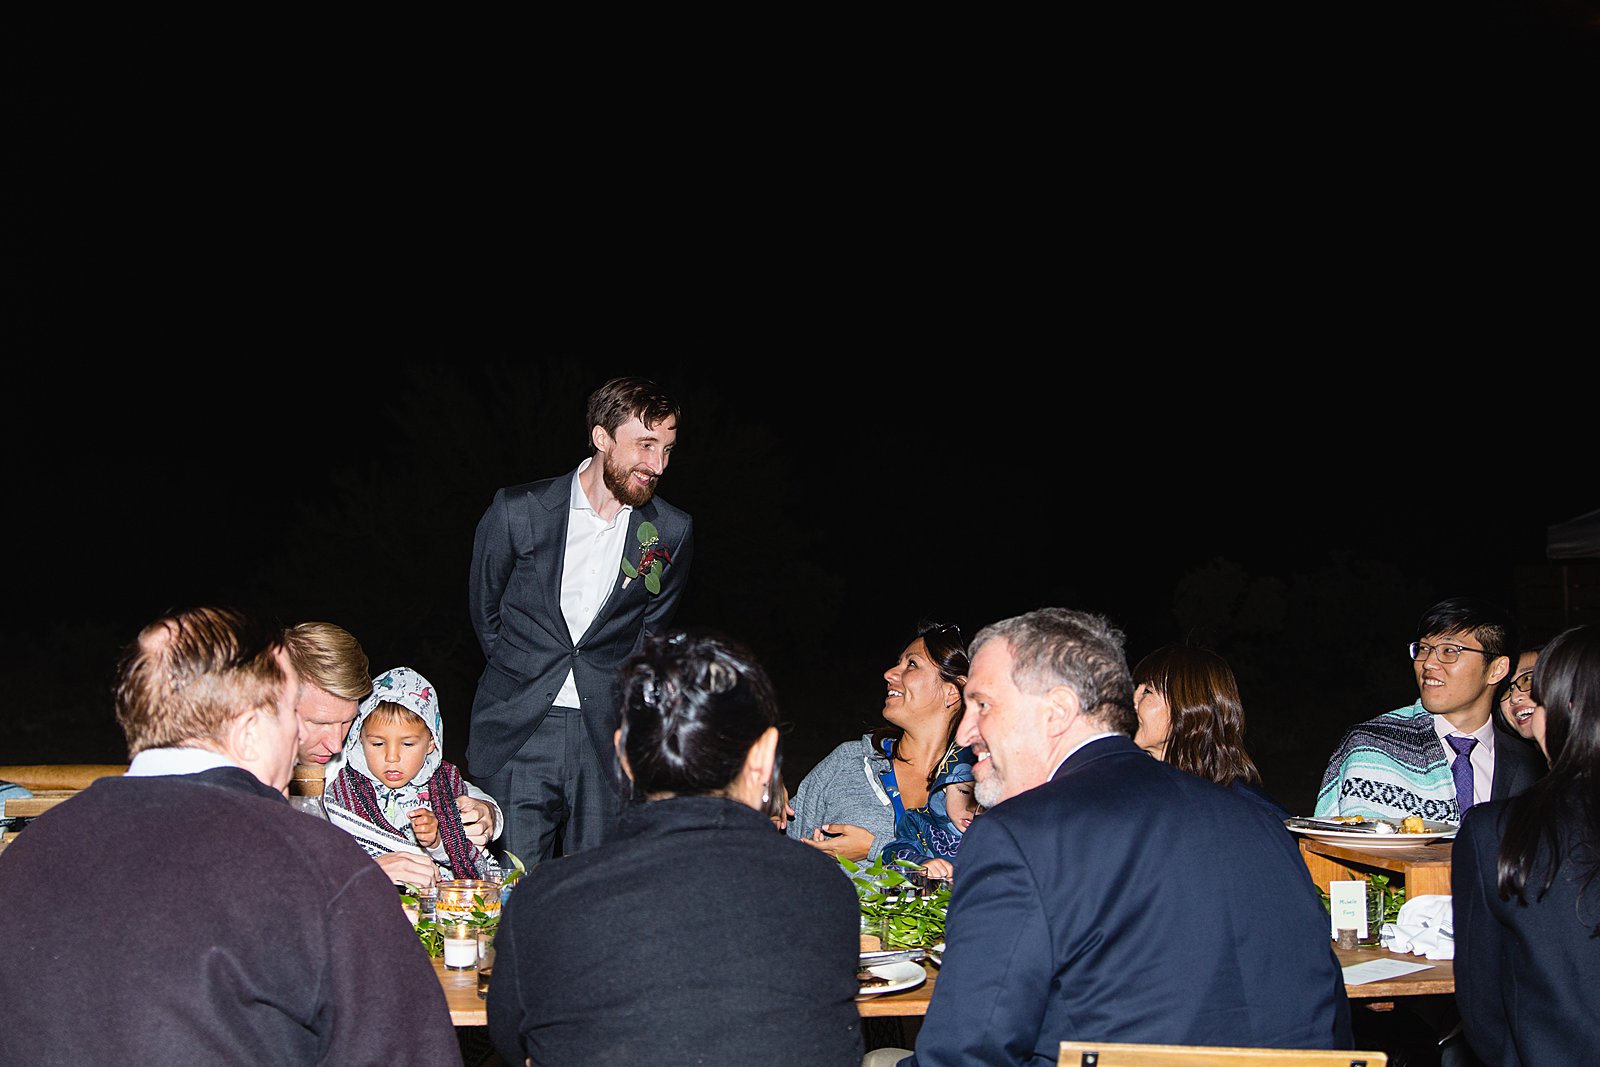 Groom mingling with guests at a Cloth and Flame wedding reception by Phoenix wedding photographer PMA Photography.